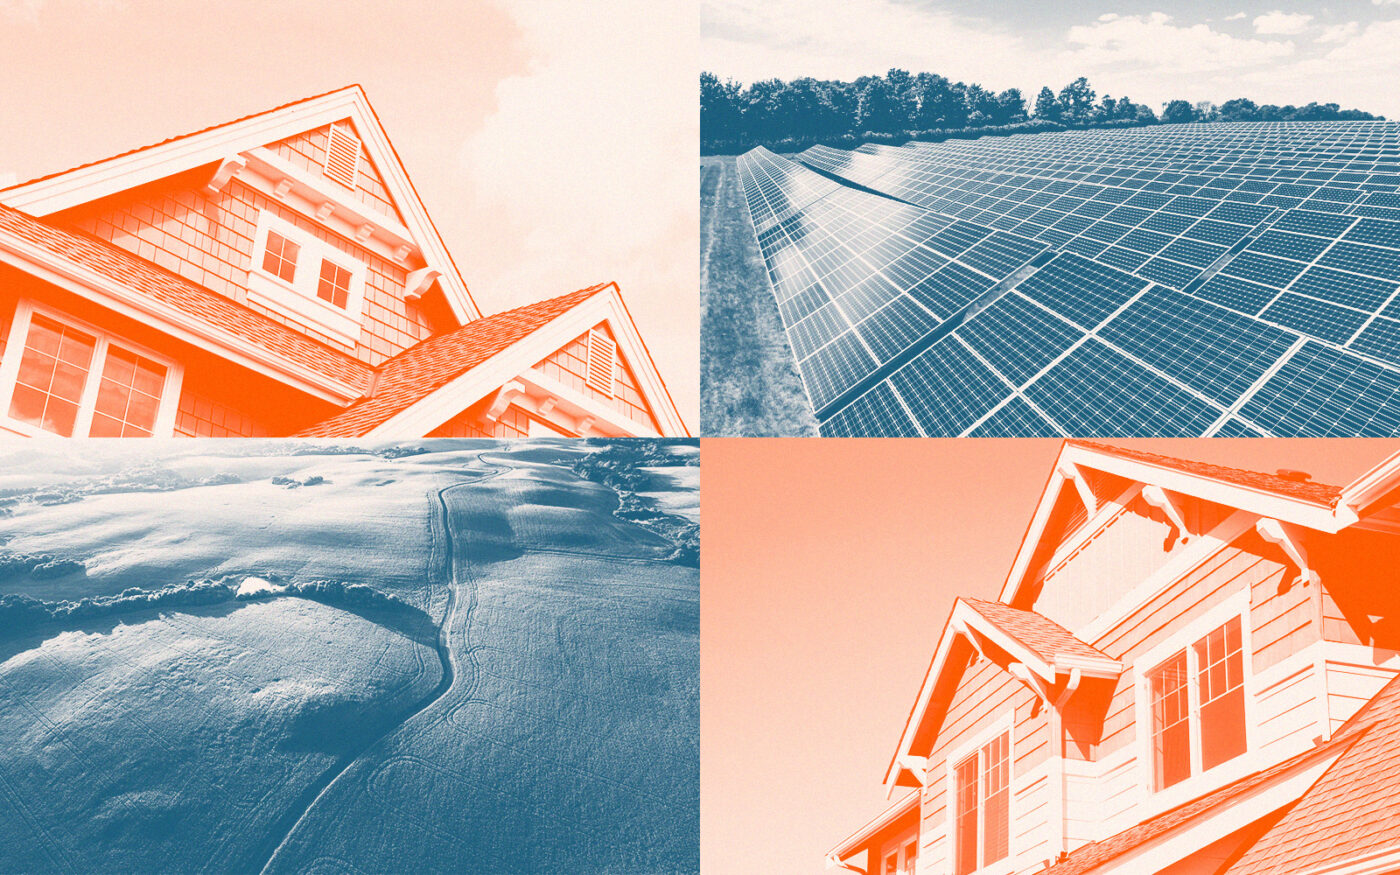 Residential, Solar Developers Buying Up Farmland